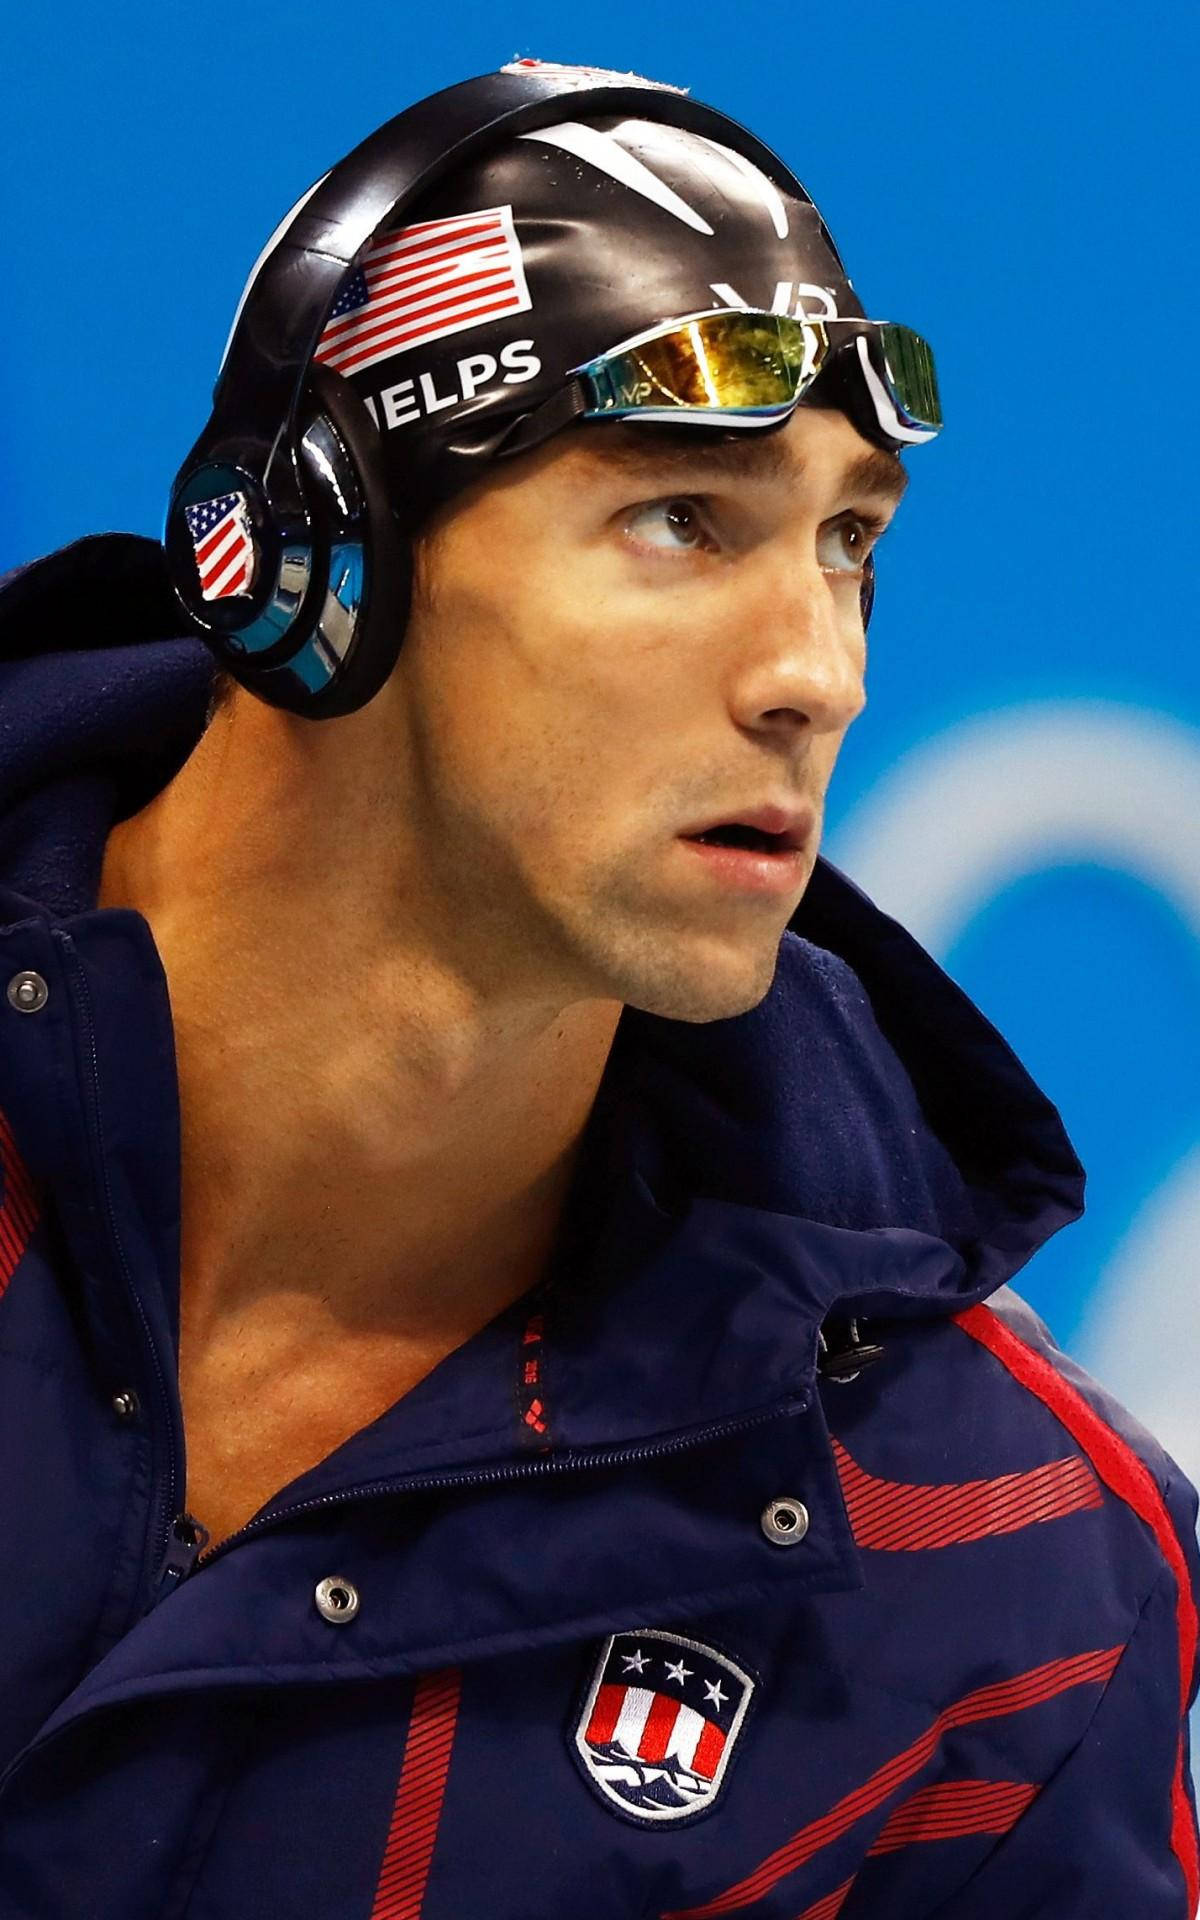 Free Phelps Wallpaper Downloads, [100+] Phelps Wallpapers for FREE |  